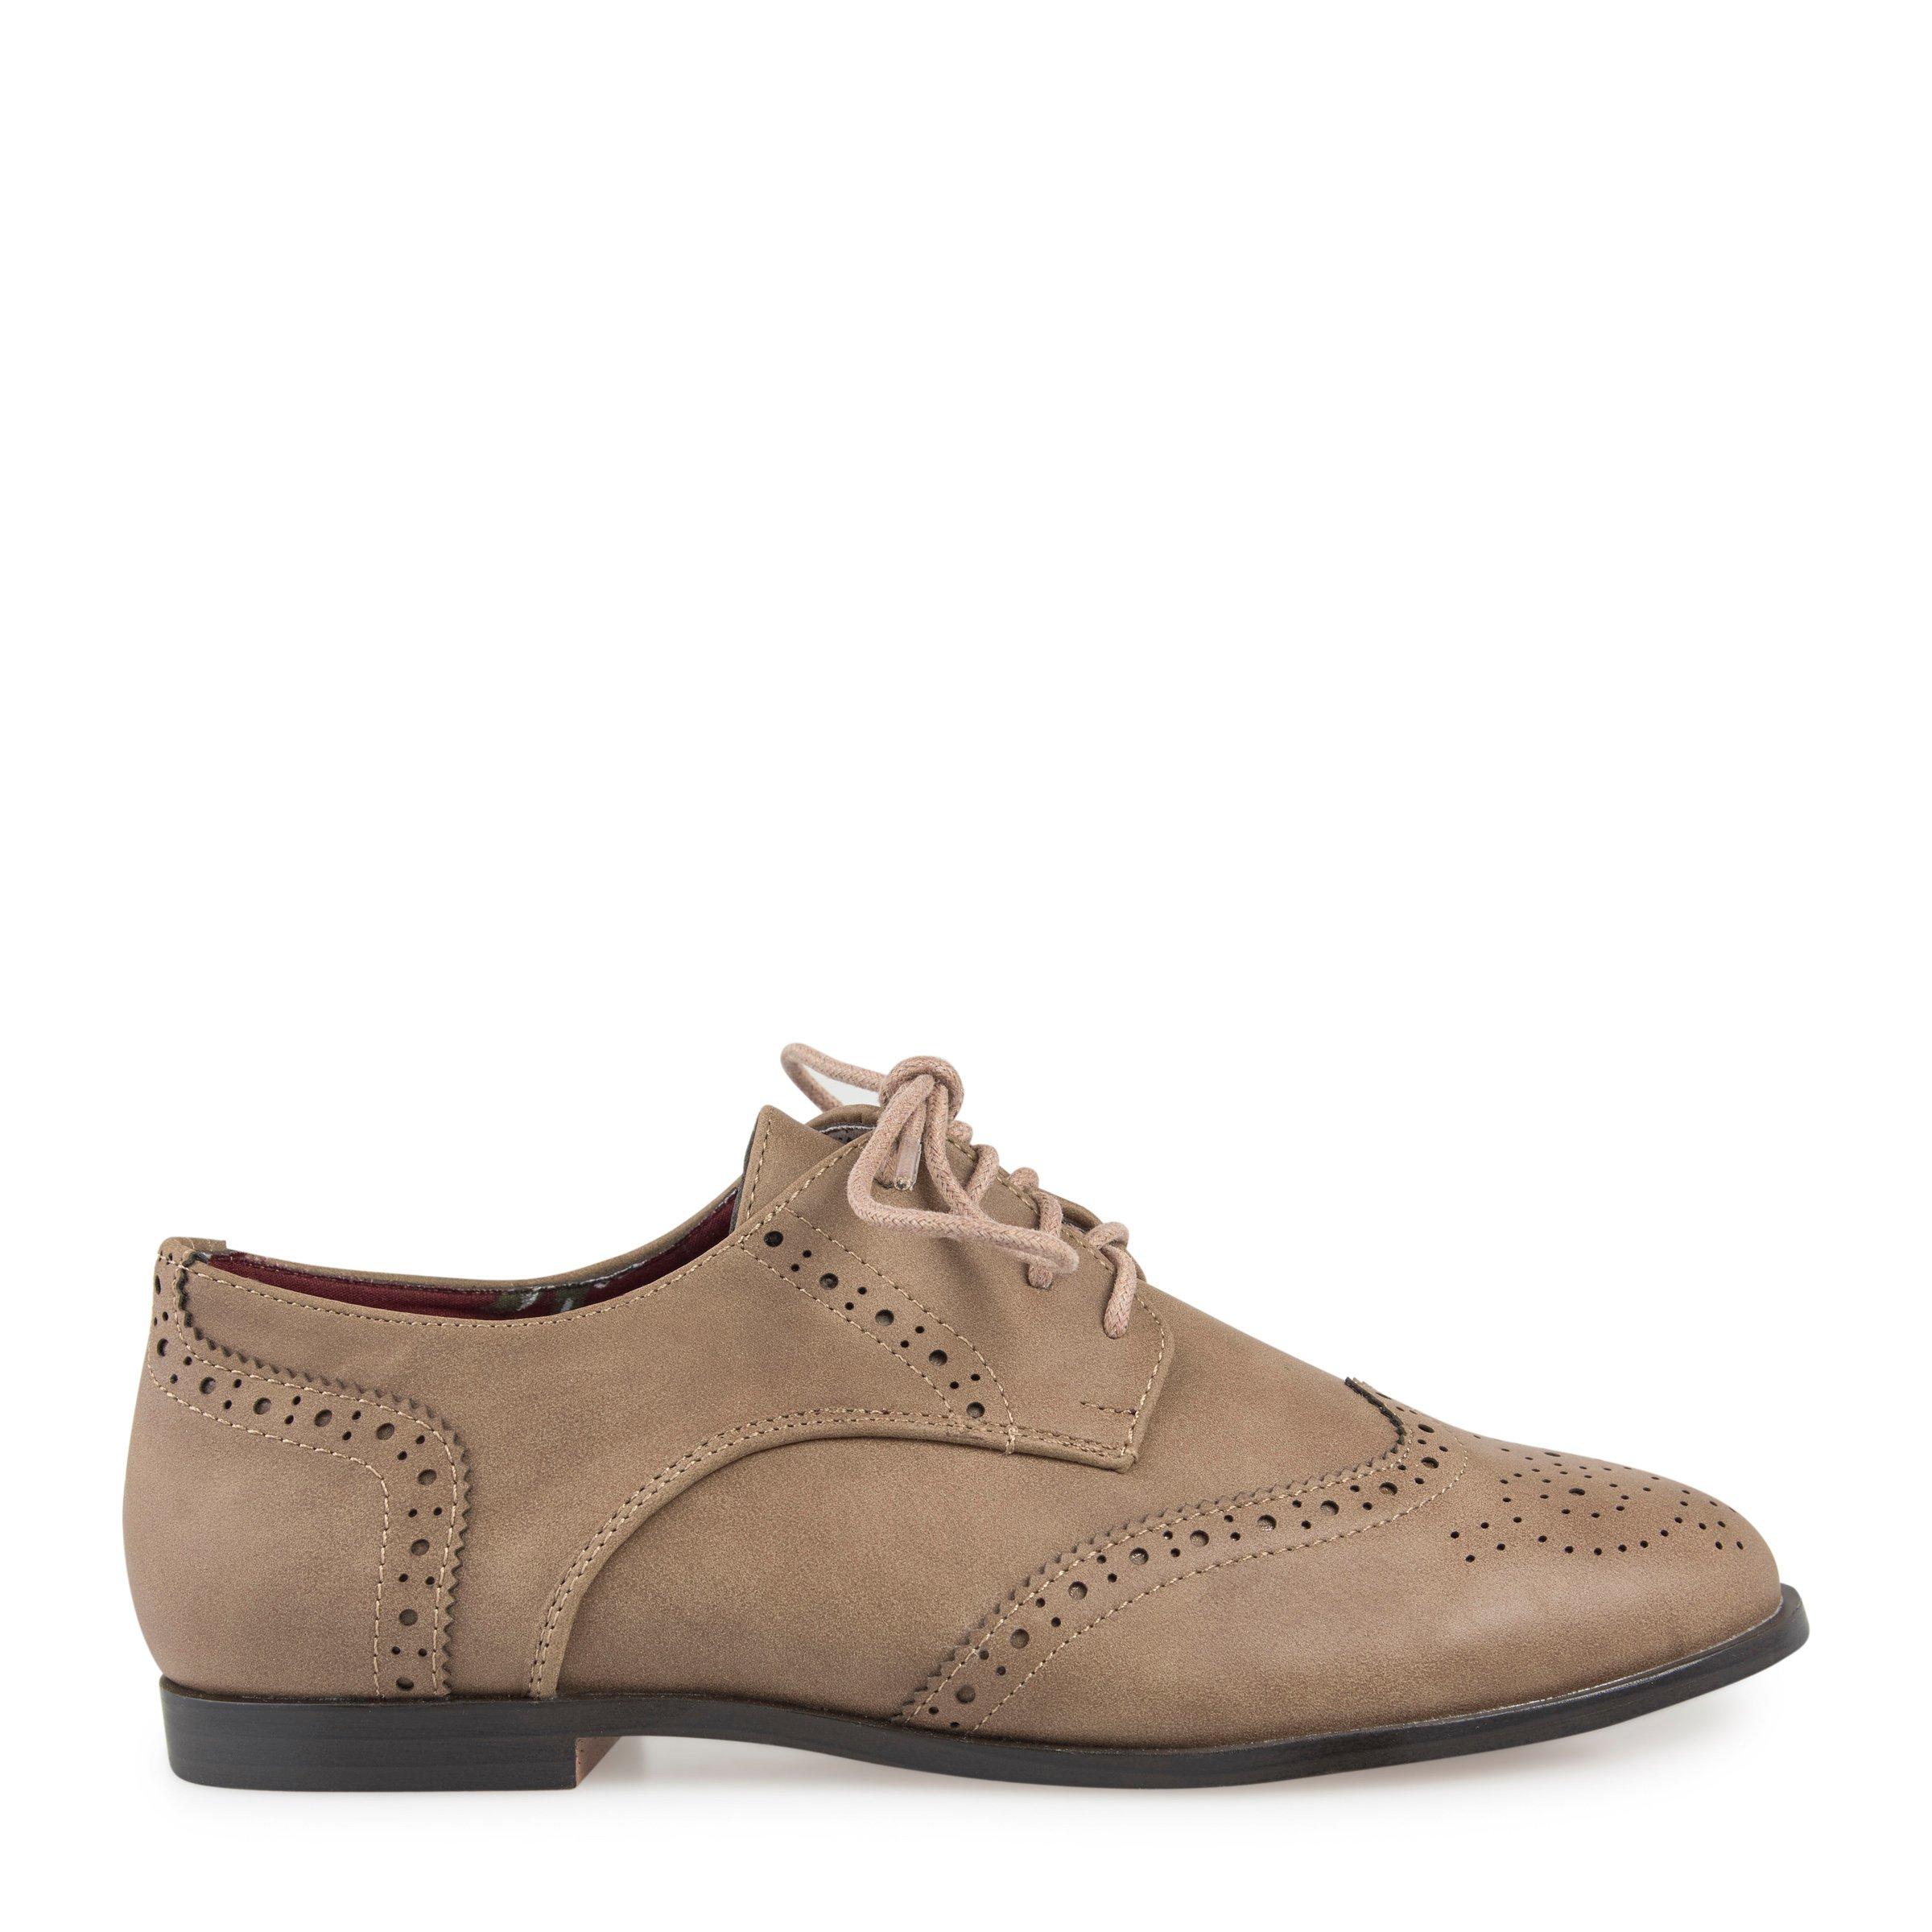 Truworths Taupe Oxford Shoe